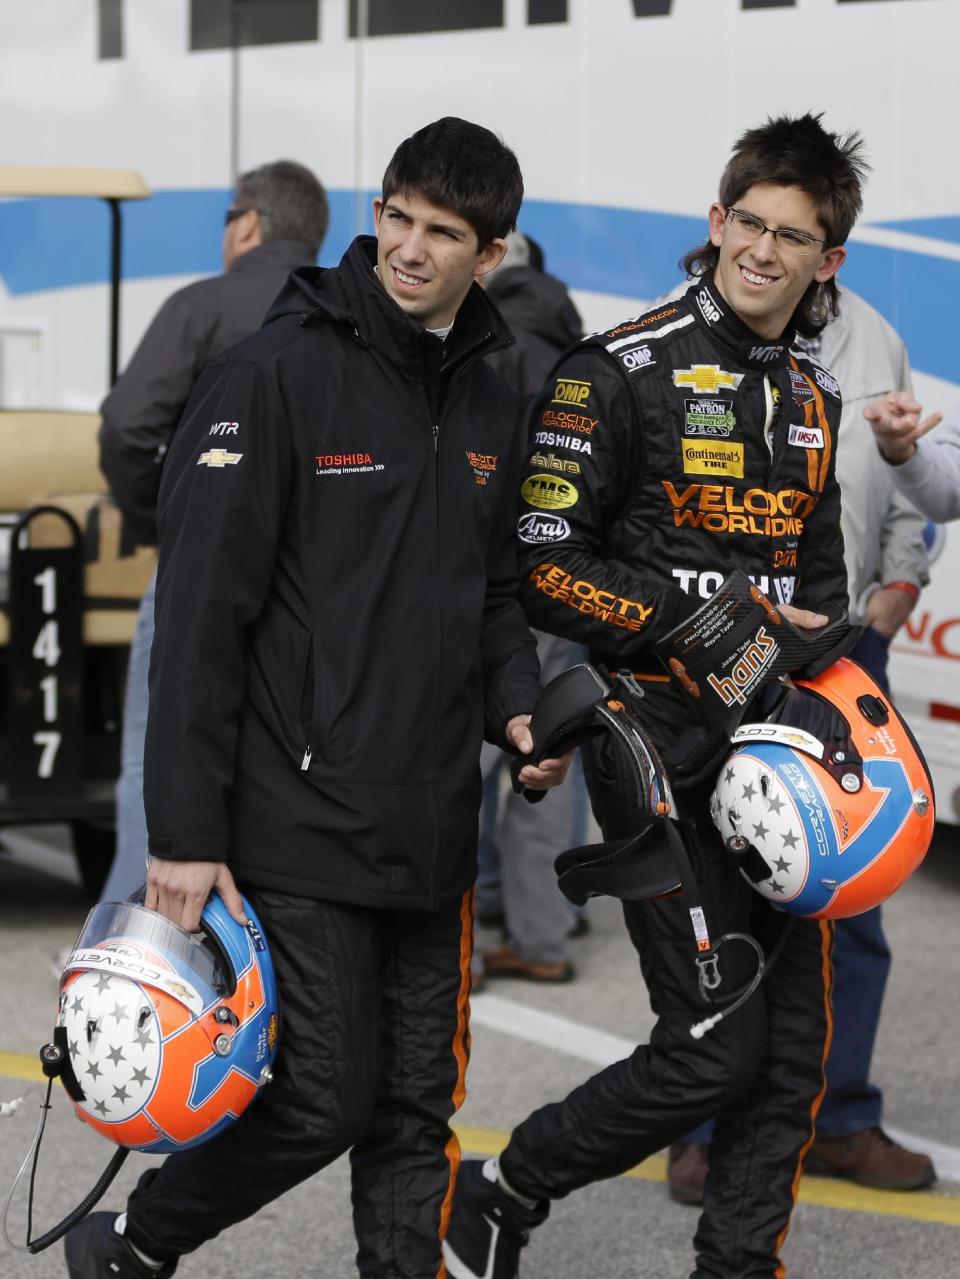 Brothers Ricky Taylor, left, and Jordan Taylor walk through the garage area after a practice session for the IMSA Series Rolex 24 hour auto race at Daytona International Speedway in Daytona Beach, Fla., Thursday, Jan. 23, 2014.(AP Photo/John Raoux)